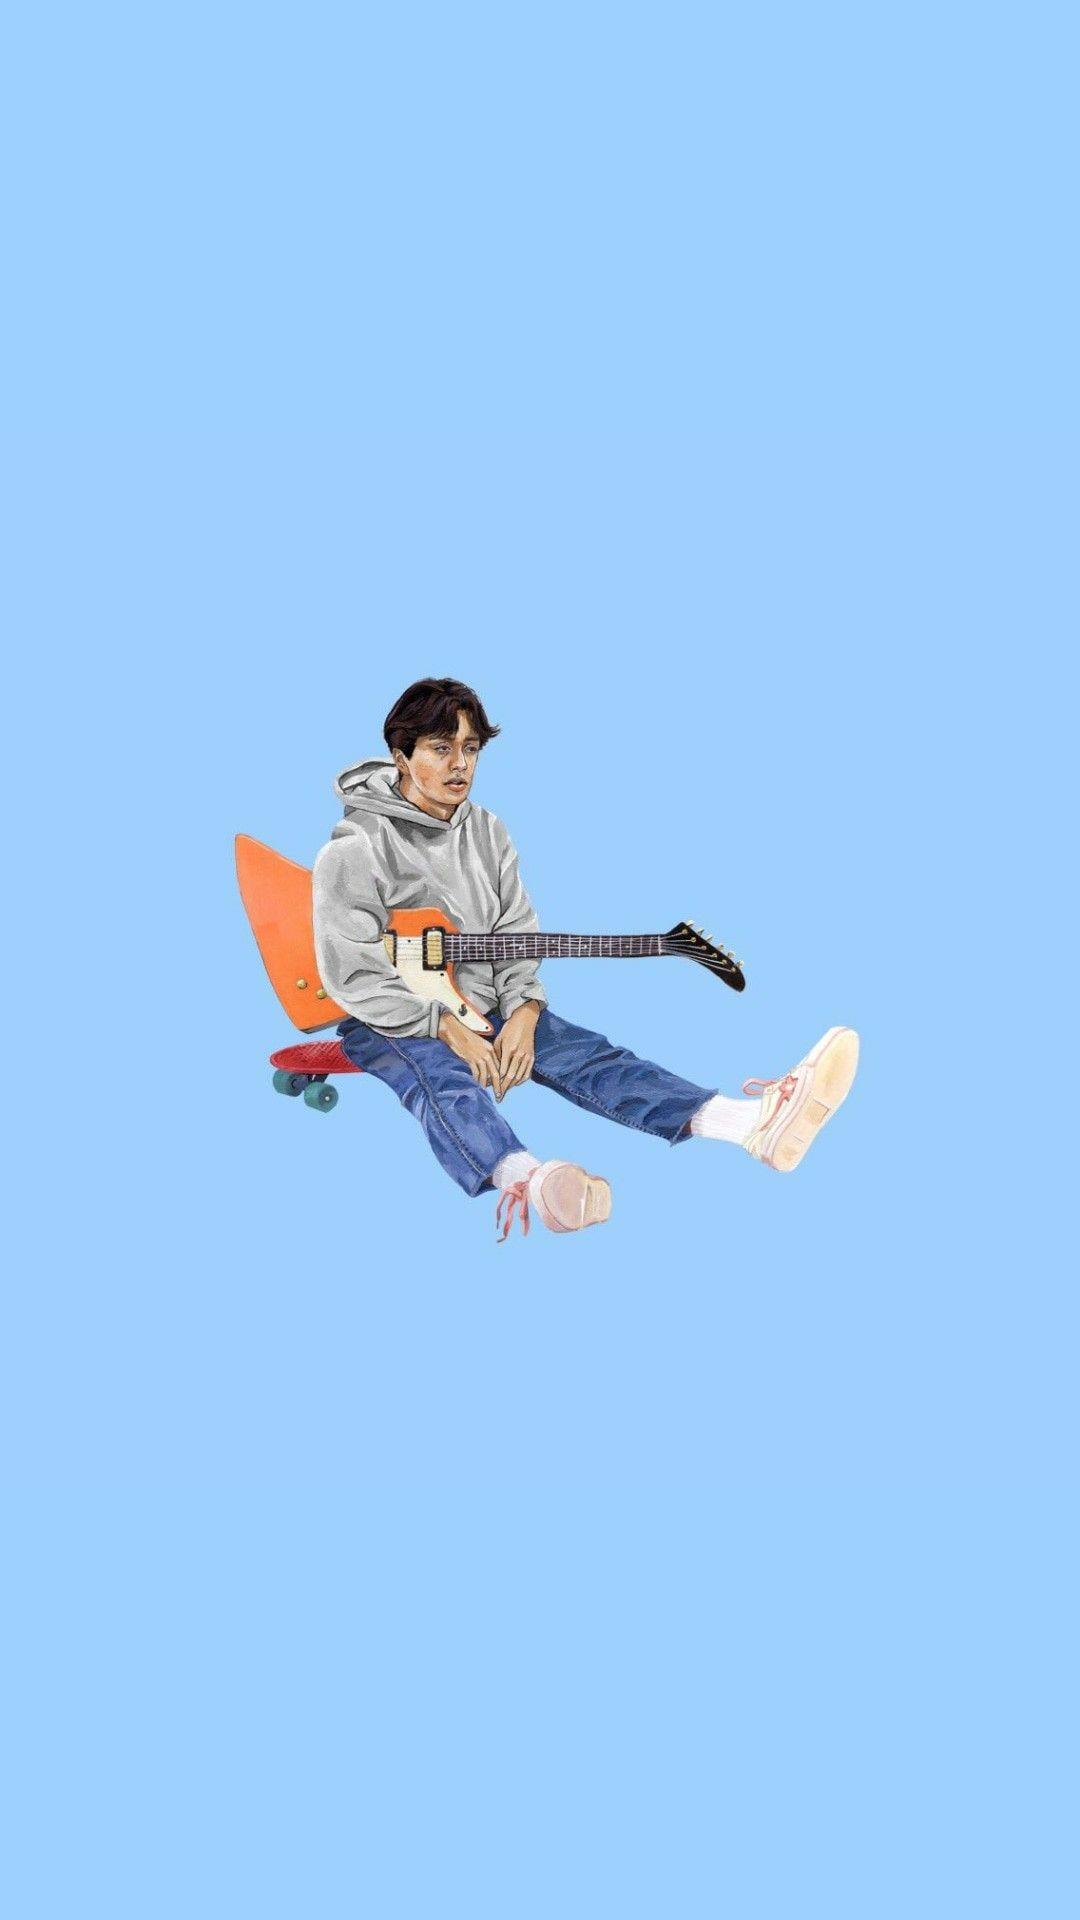 Ayee ive been loving boy pablo's new album Soy Pablo in 2019